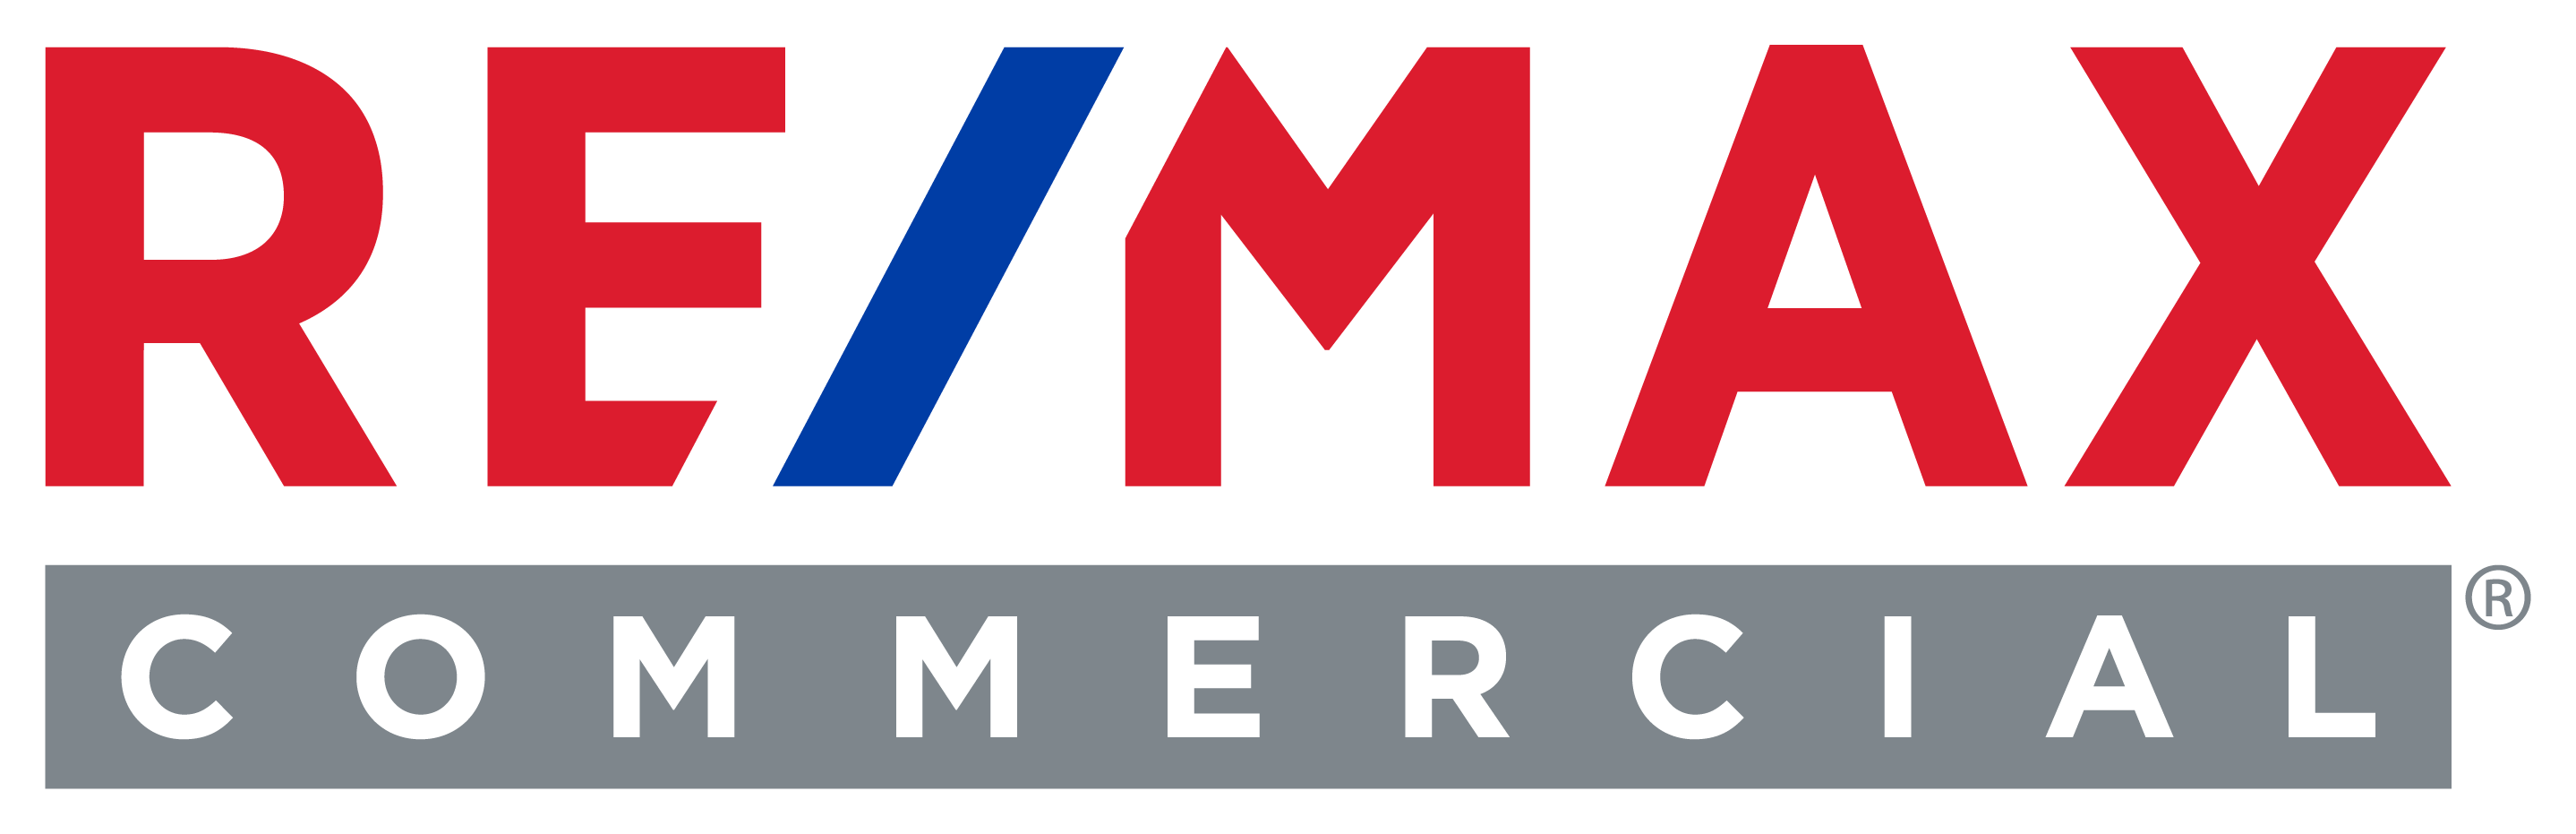 RE/MAX Commercial